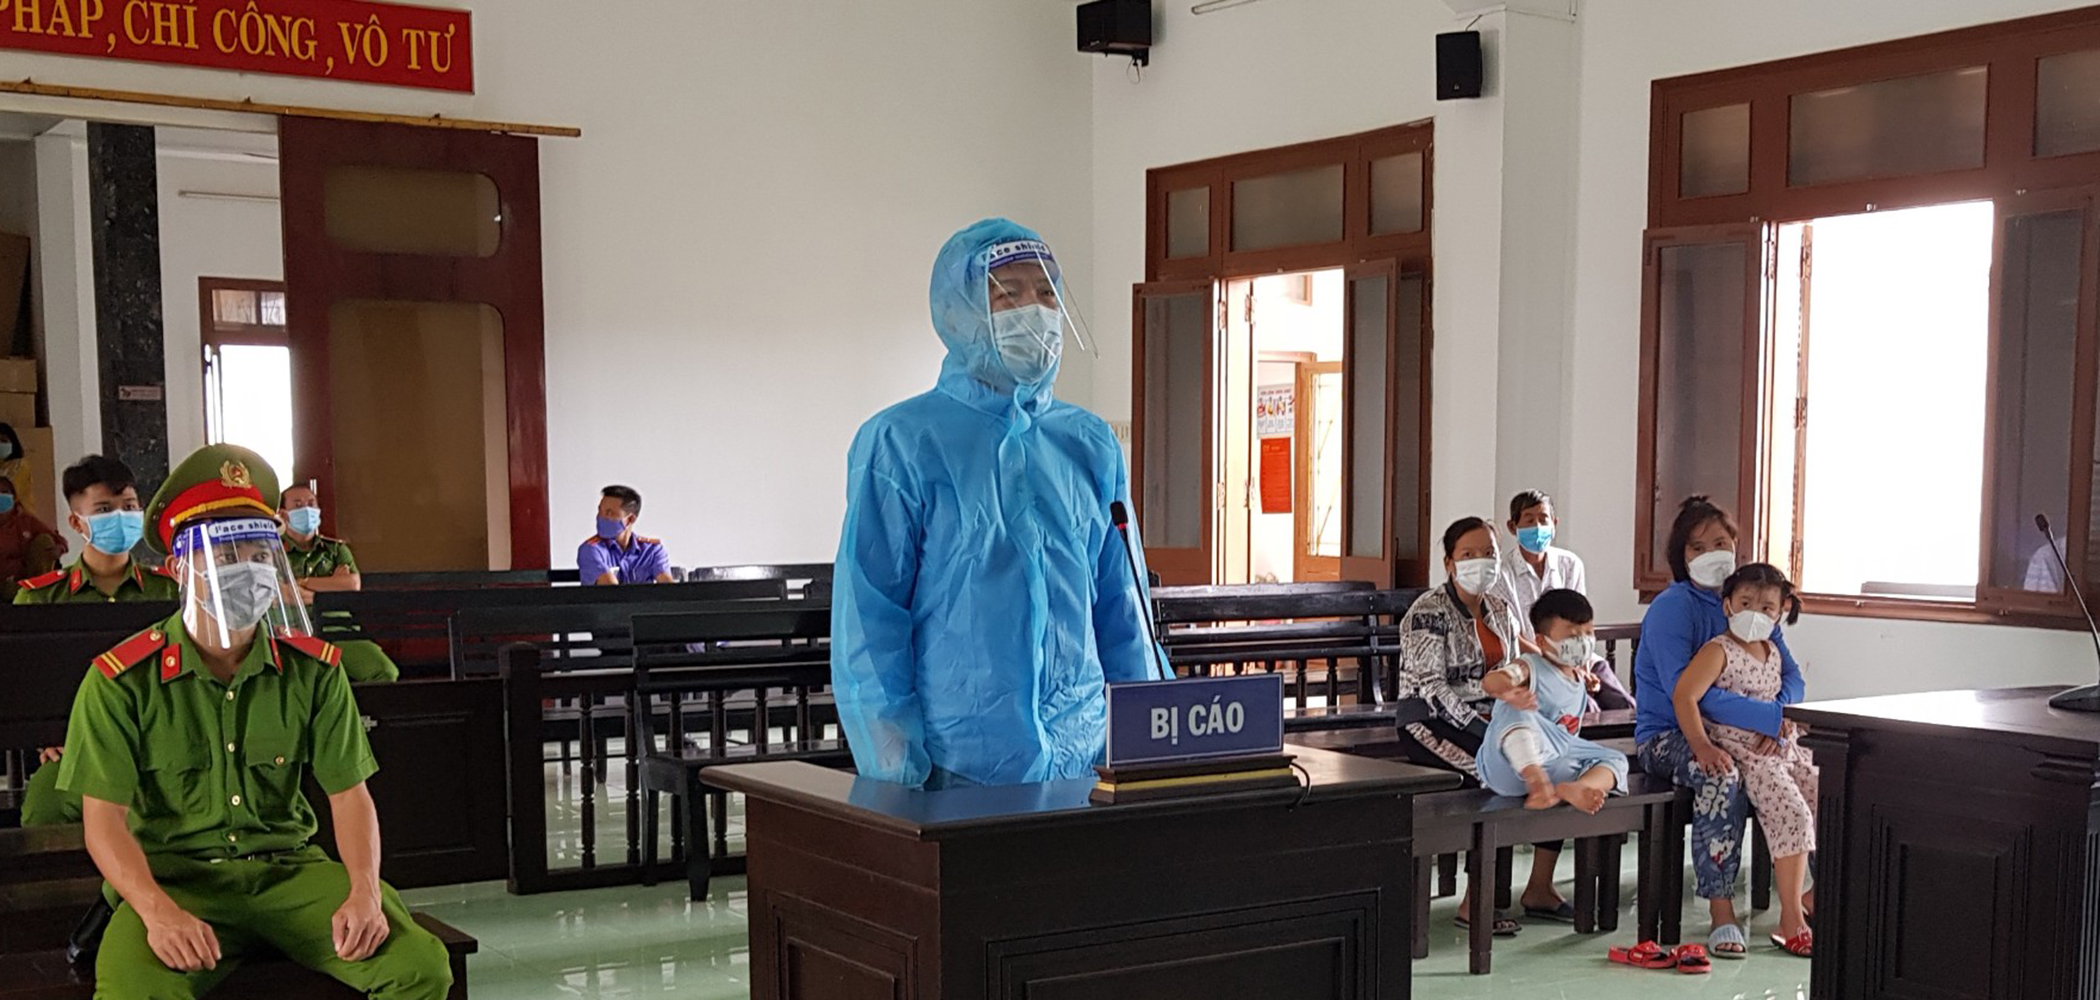 Vietnamese man imprisoned for 25 years for causing house fire that injured four people